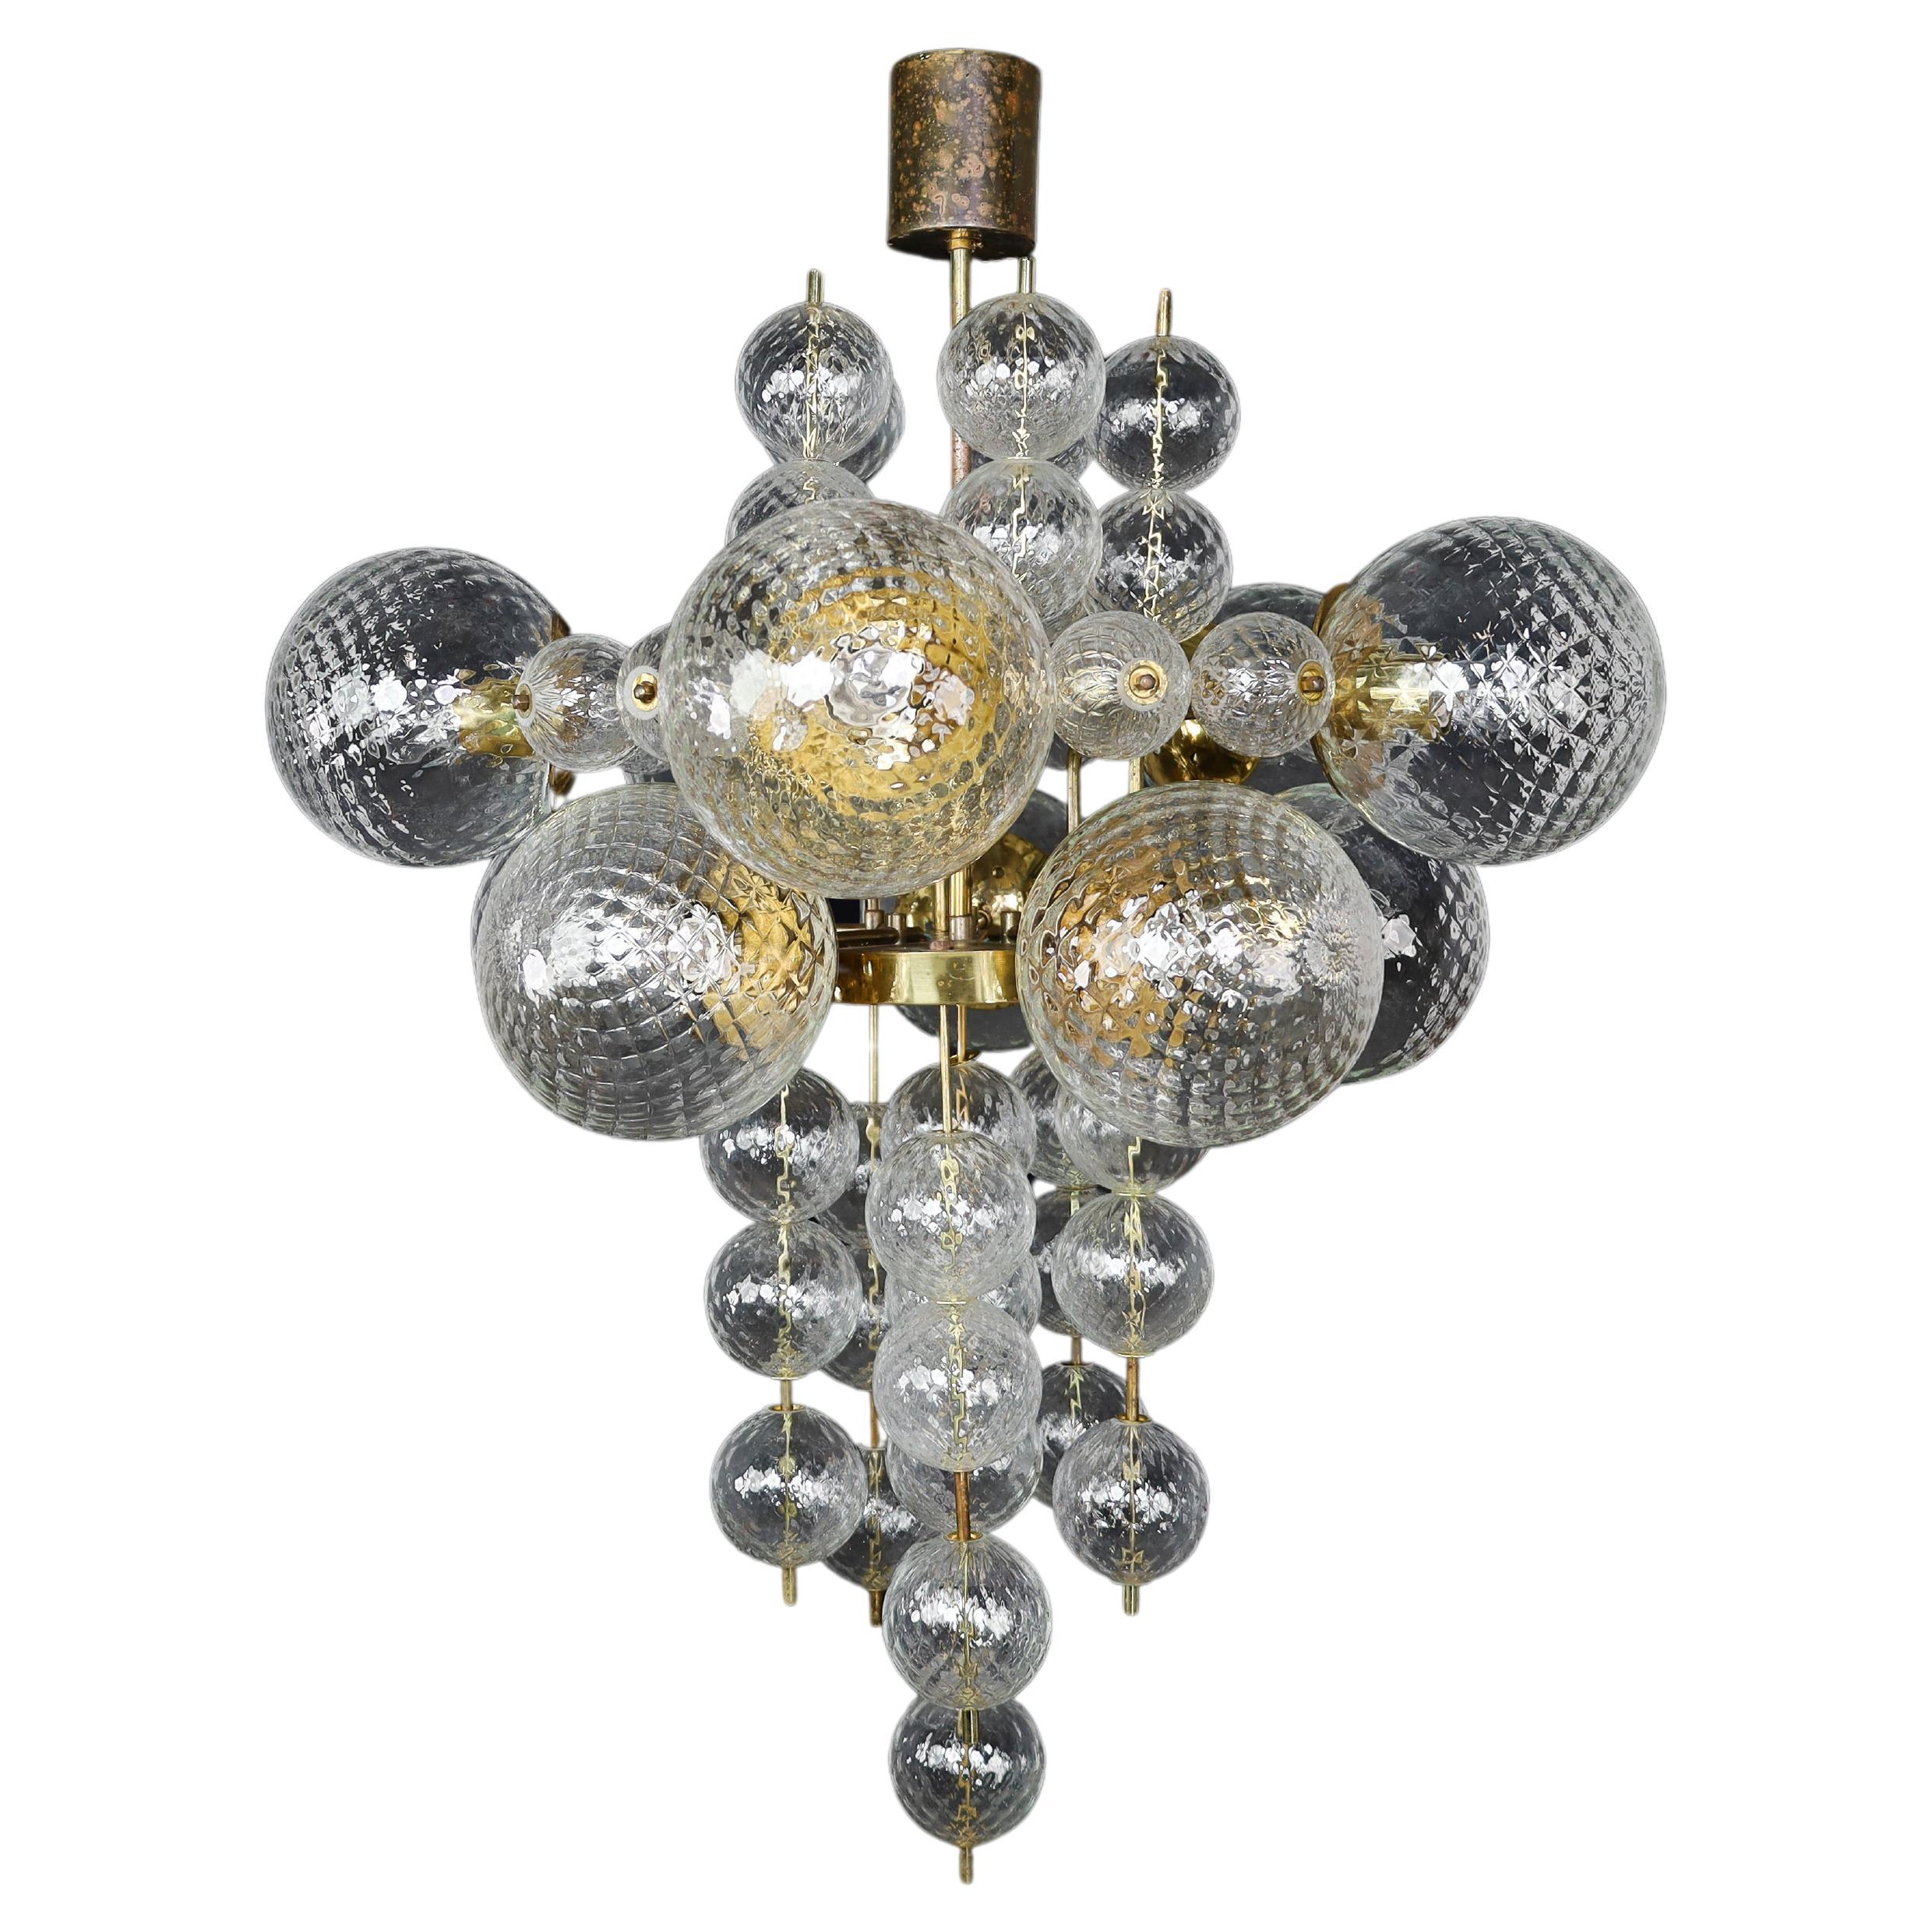  Chandelier with Patinated brass fixture and hand-blowed glass globes  CZ 1960s For Sale